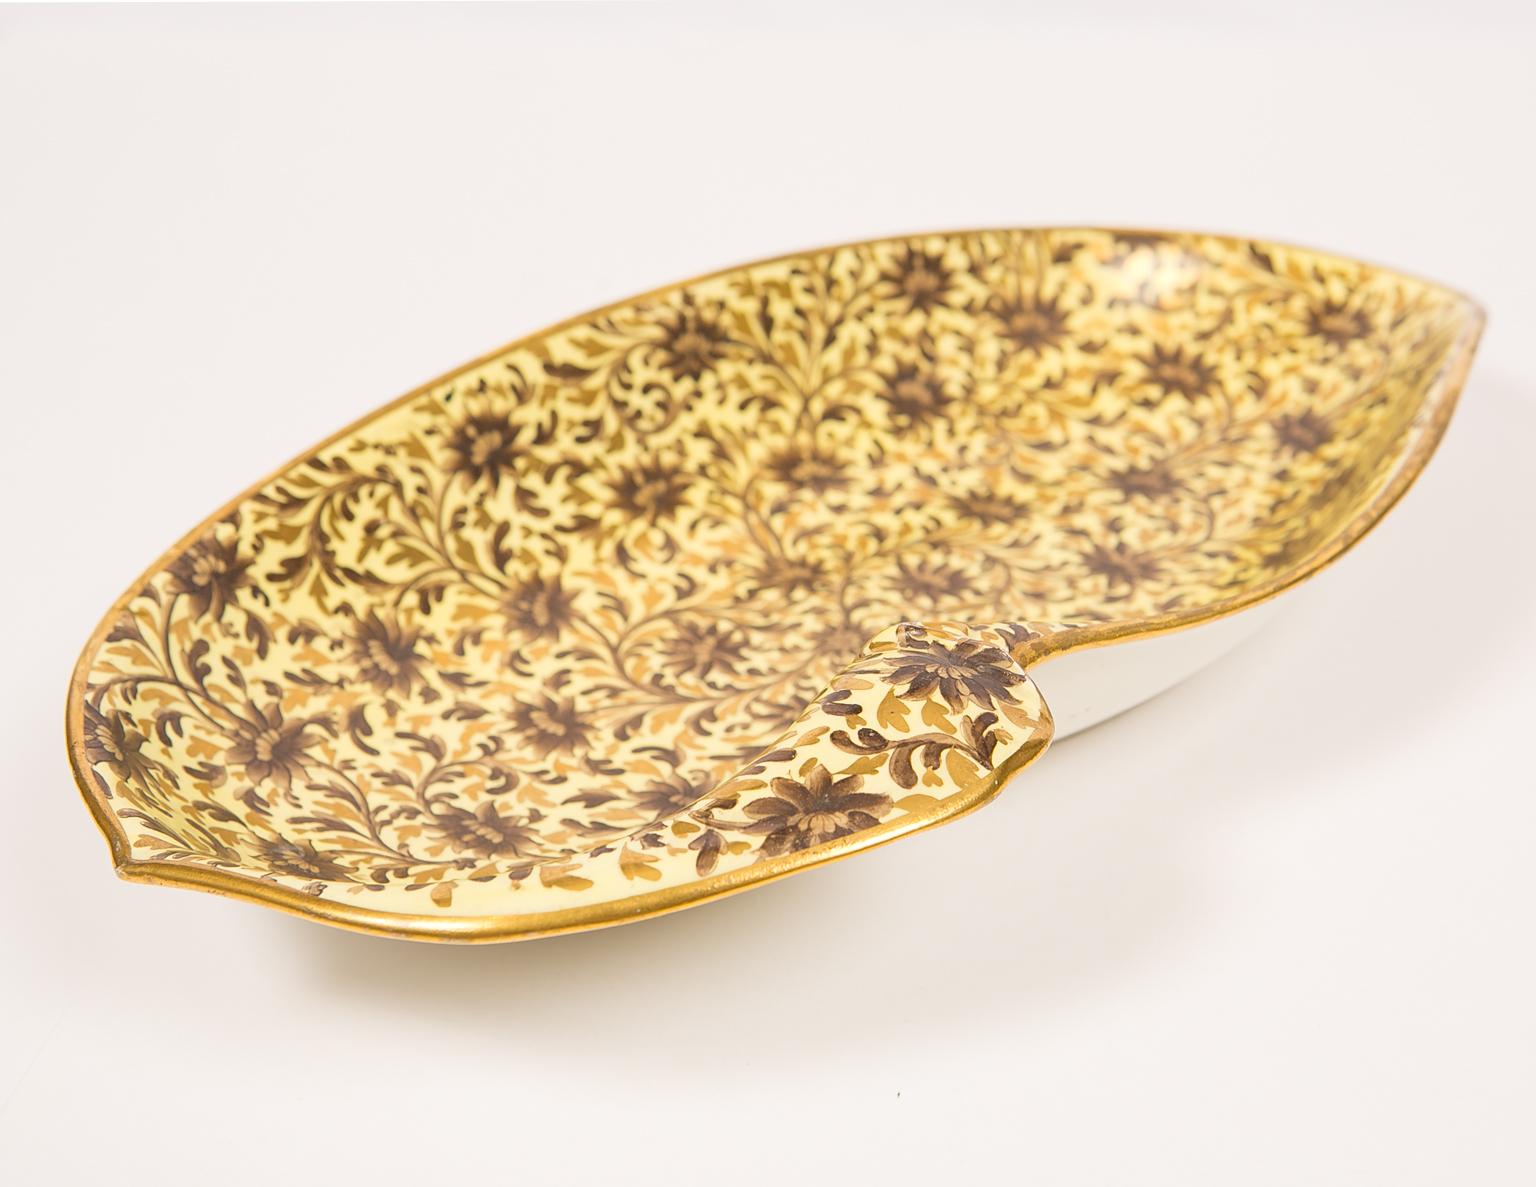 Antique English Pottery Shell Shaped Dish with Yellow Ground Made circa 1820 In Excellent Condition For Sale In Katonah, NY